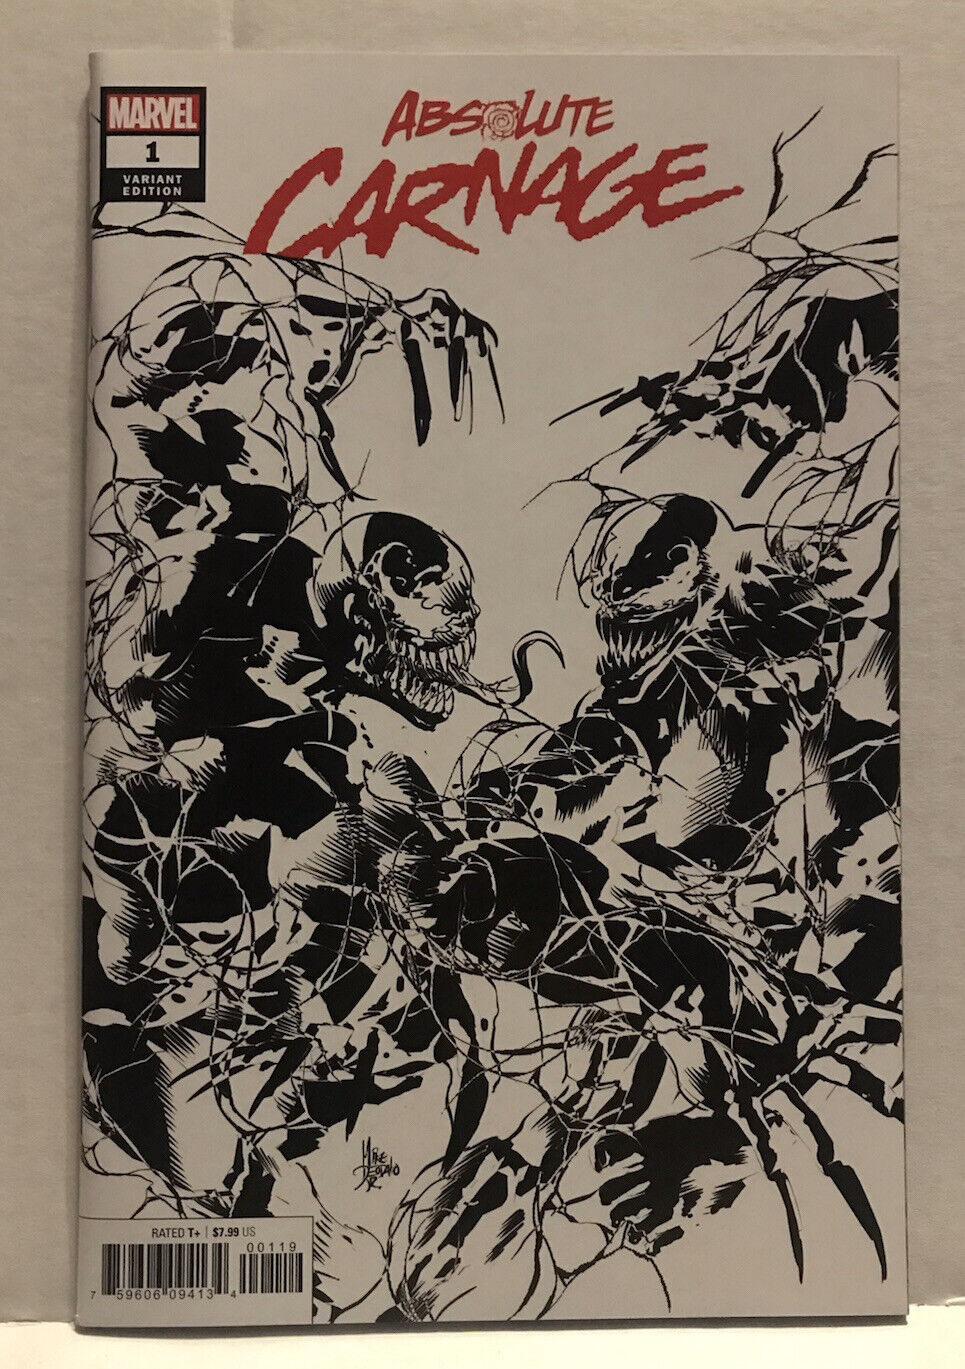 Absolute Carnage #1 Deodato Sketch Variant 1 per store